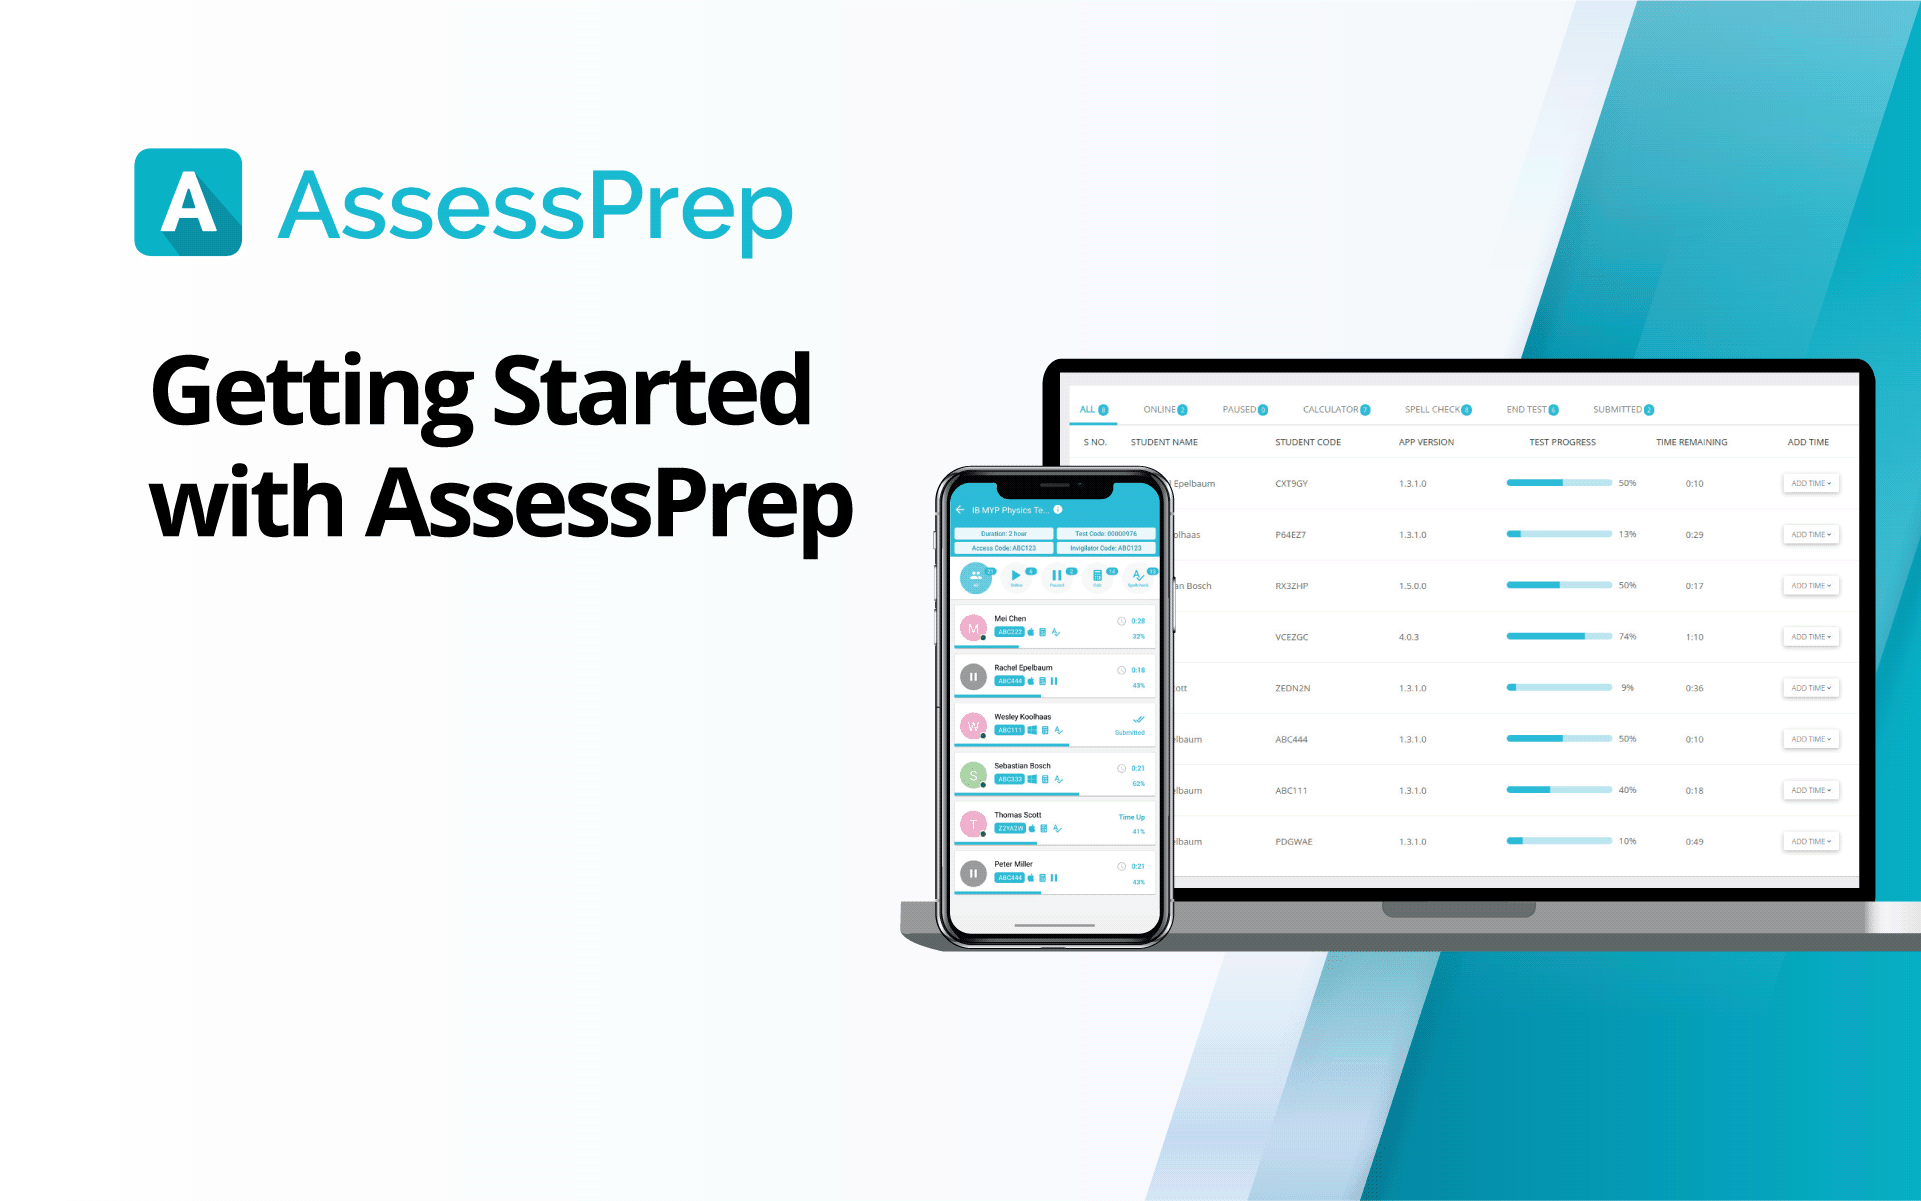 Getting Started with AssessPrep